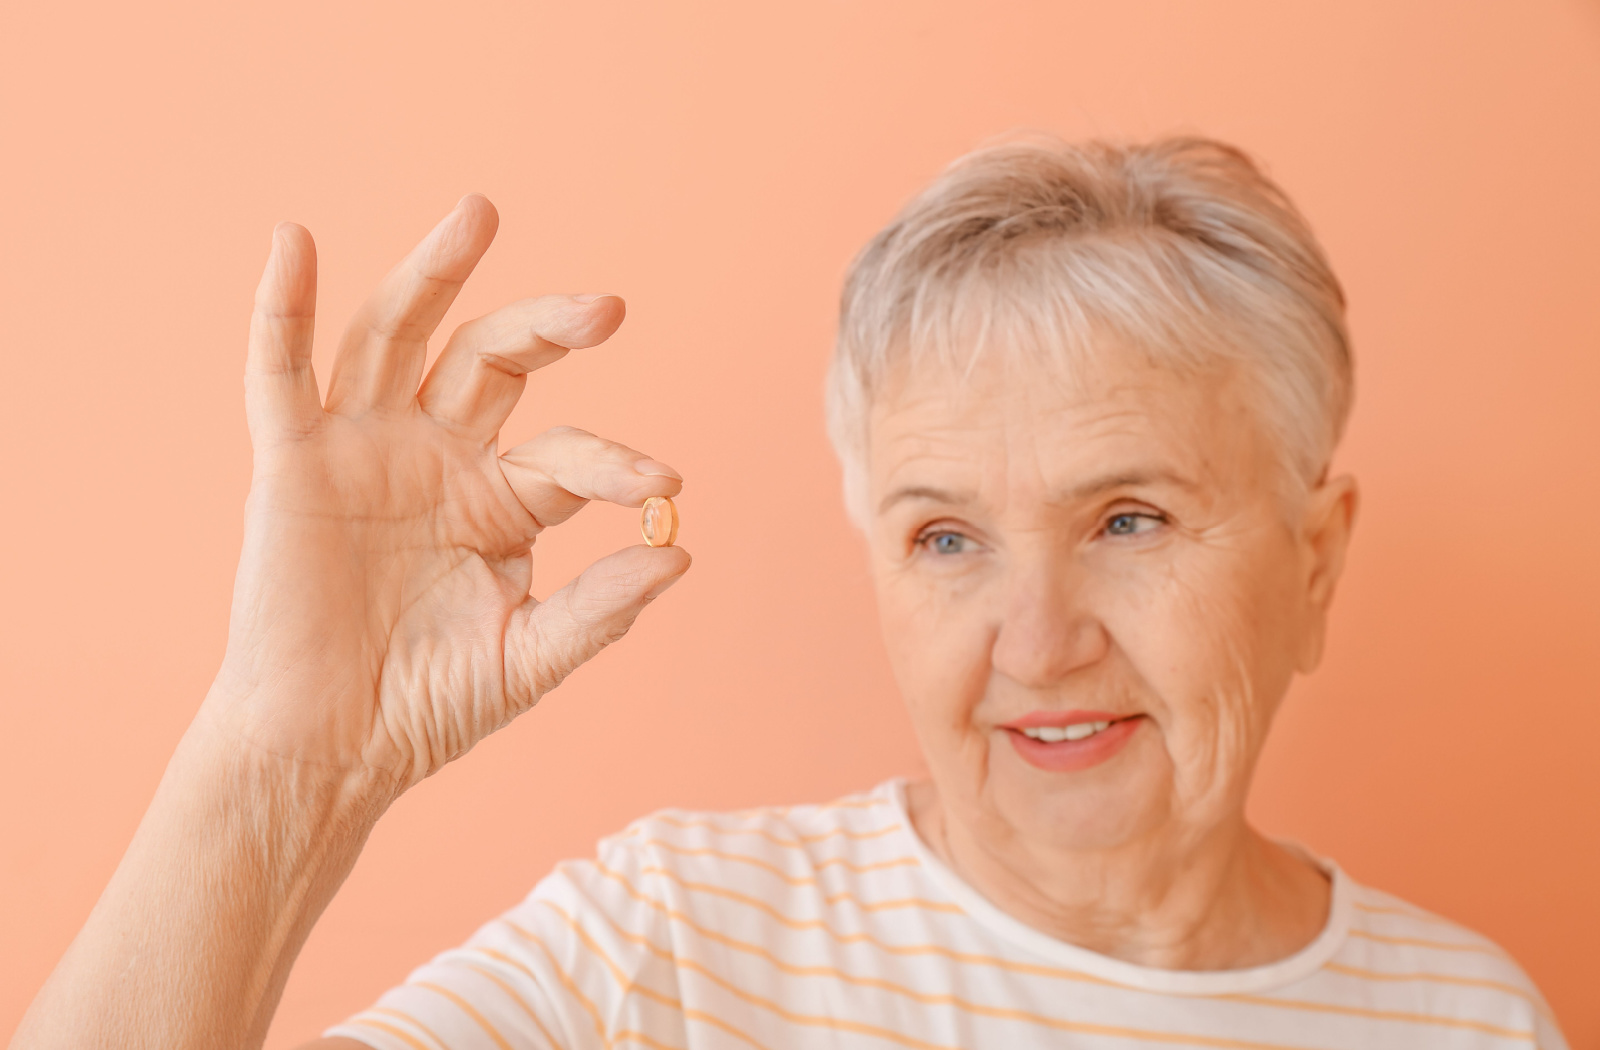 Close-up of a senior woman with short hair holding up a fish oil pill in her right hand against an orange background